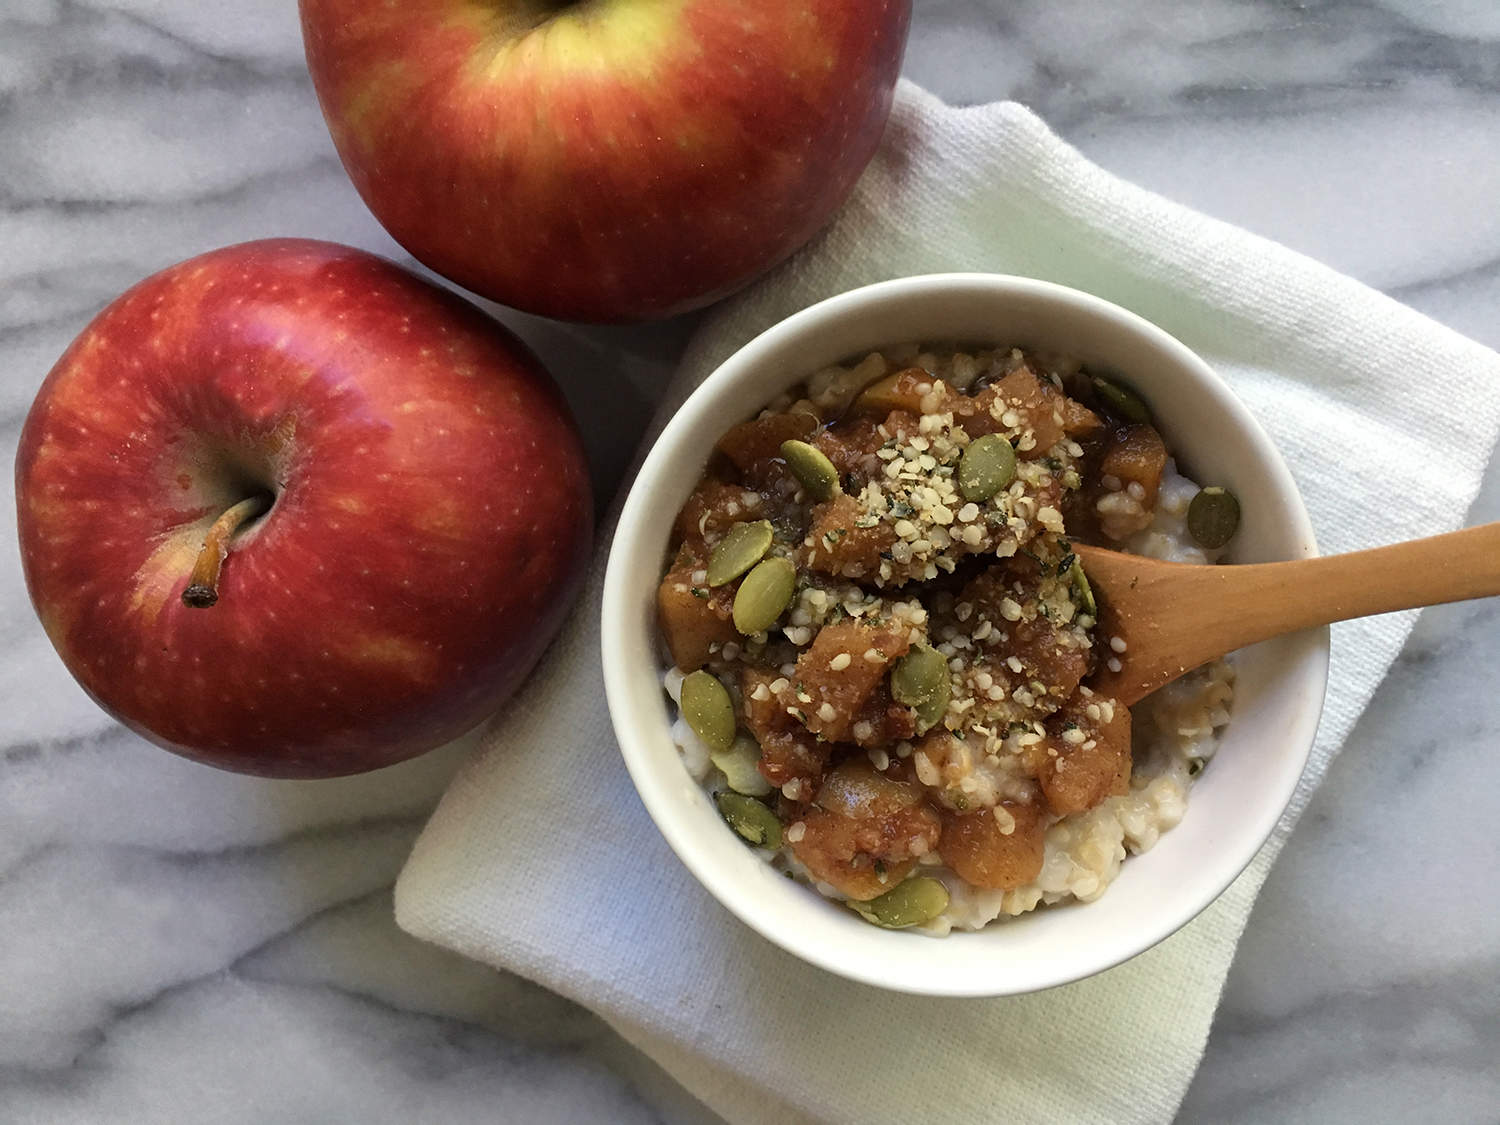 Recipe: Oatmeal With Apple Cinnamon Compote and Pepitas